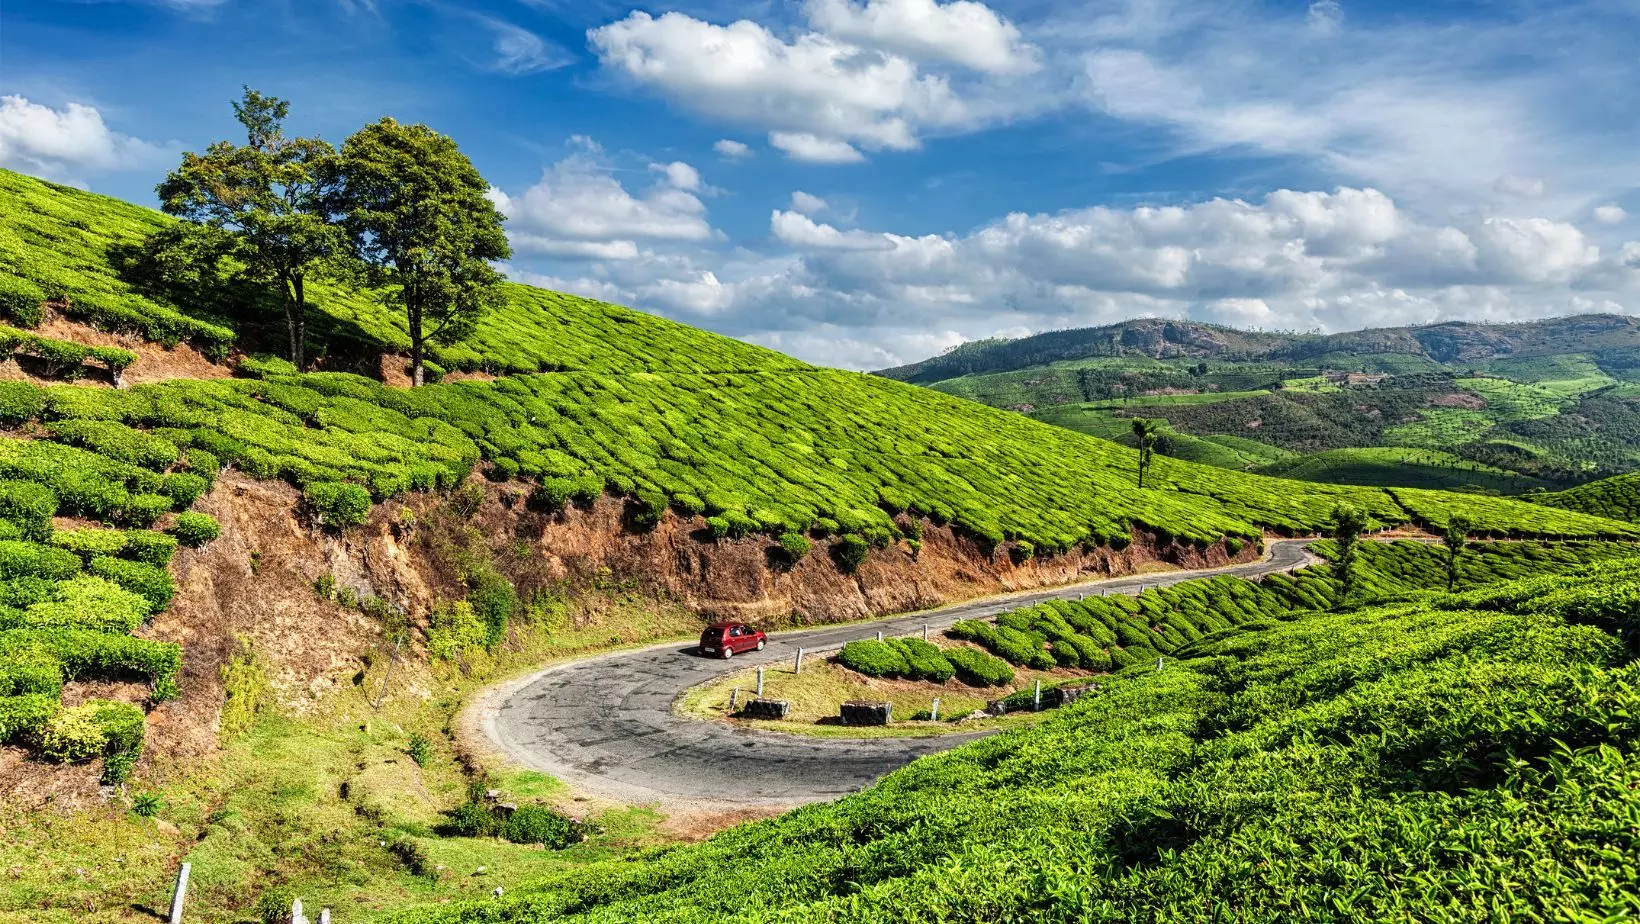 Kerala to seek Centres approval for UAE-promoted tourism township at Idukki